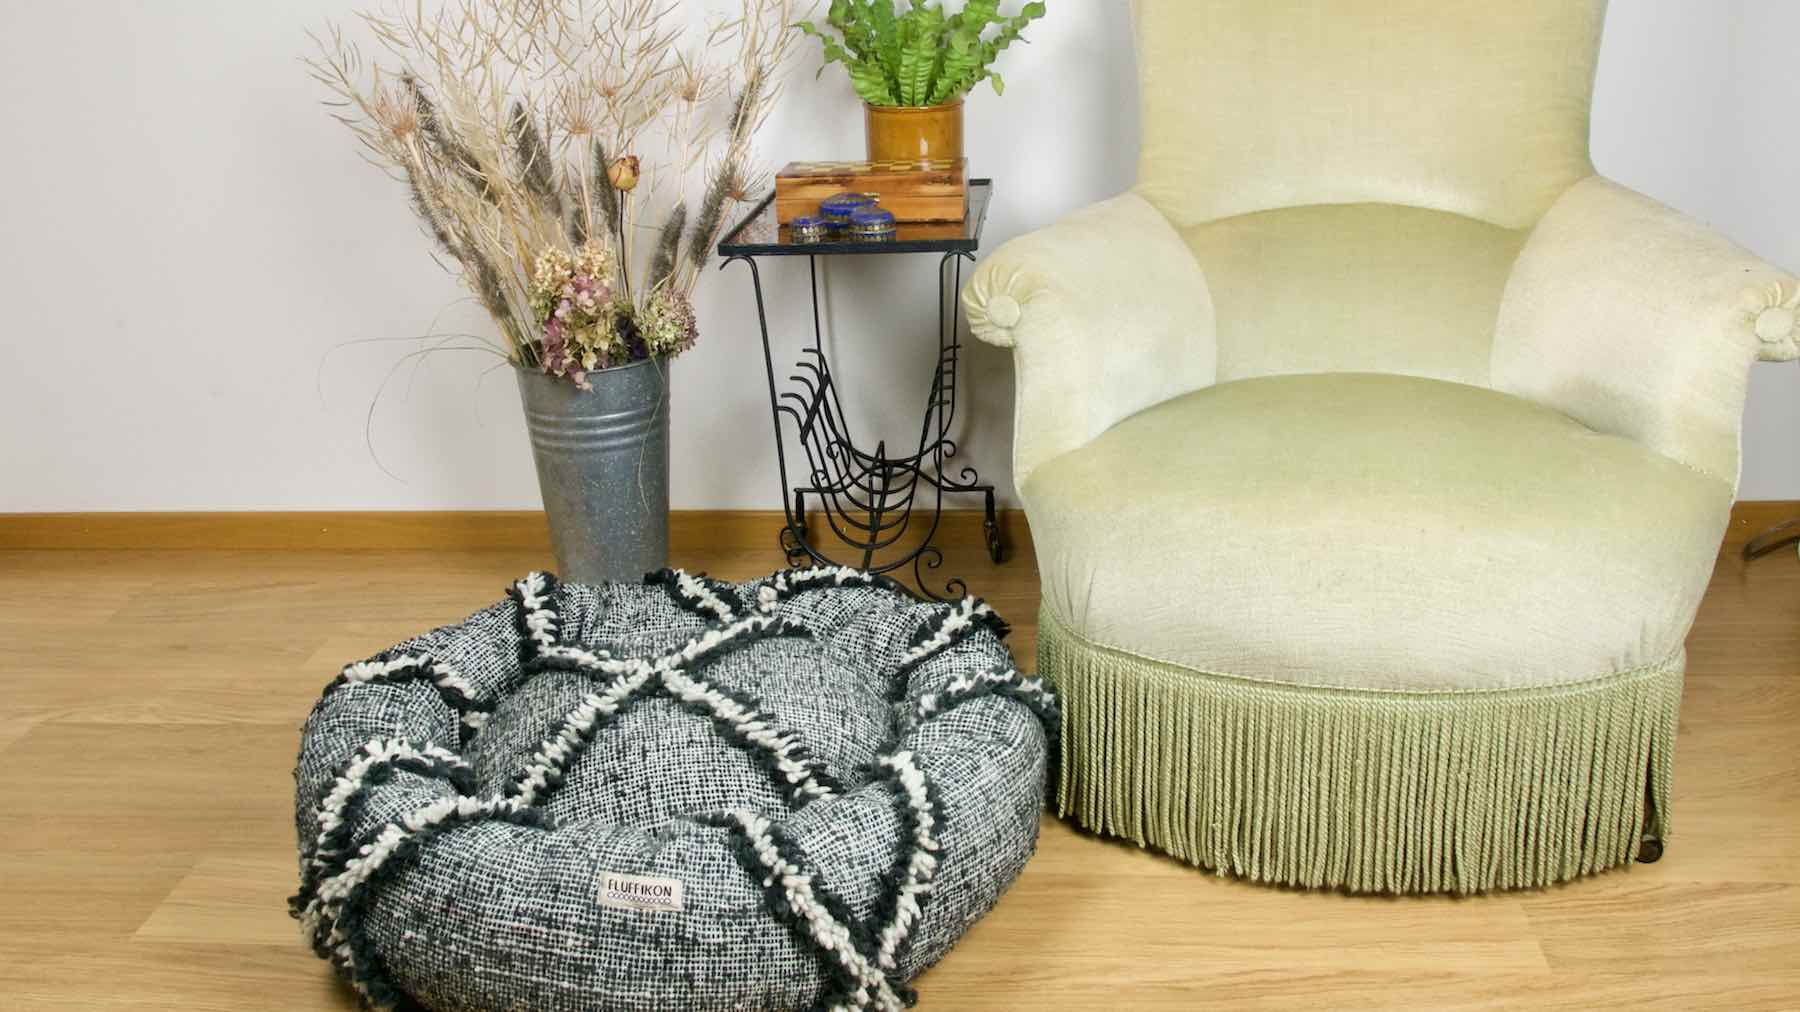 Kilim dog bed in front of a green velvet chair. The customized dog bed is made from a Moroccan Kilim wool rug.